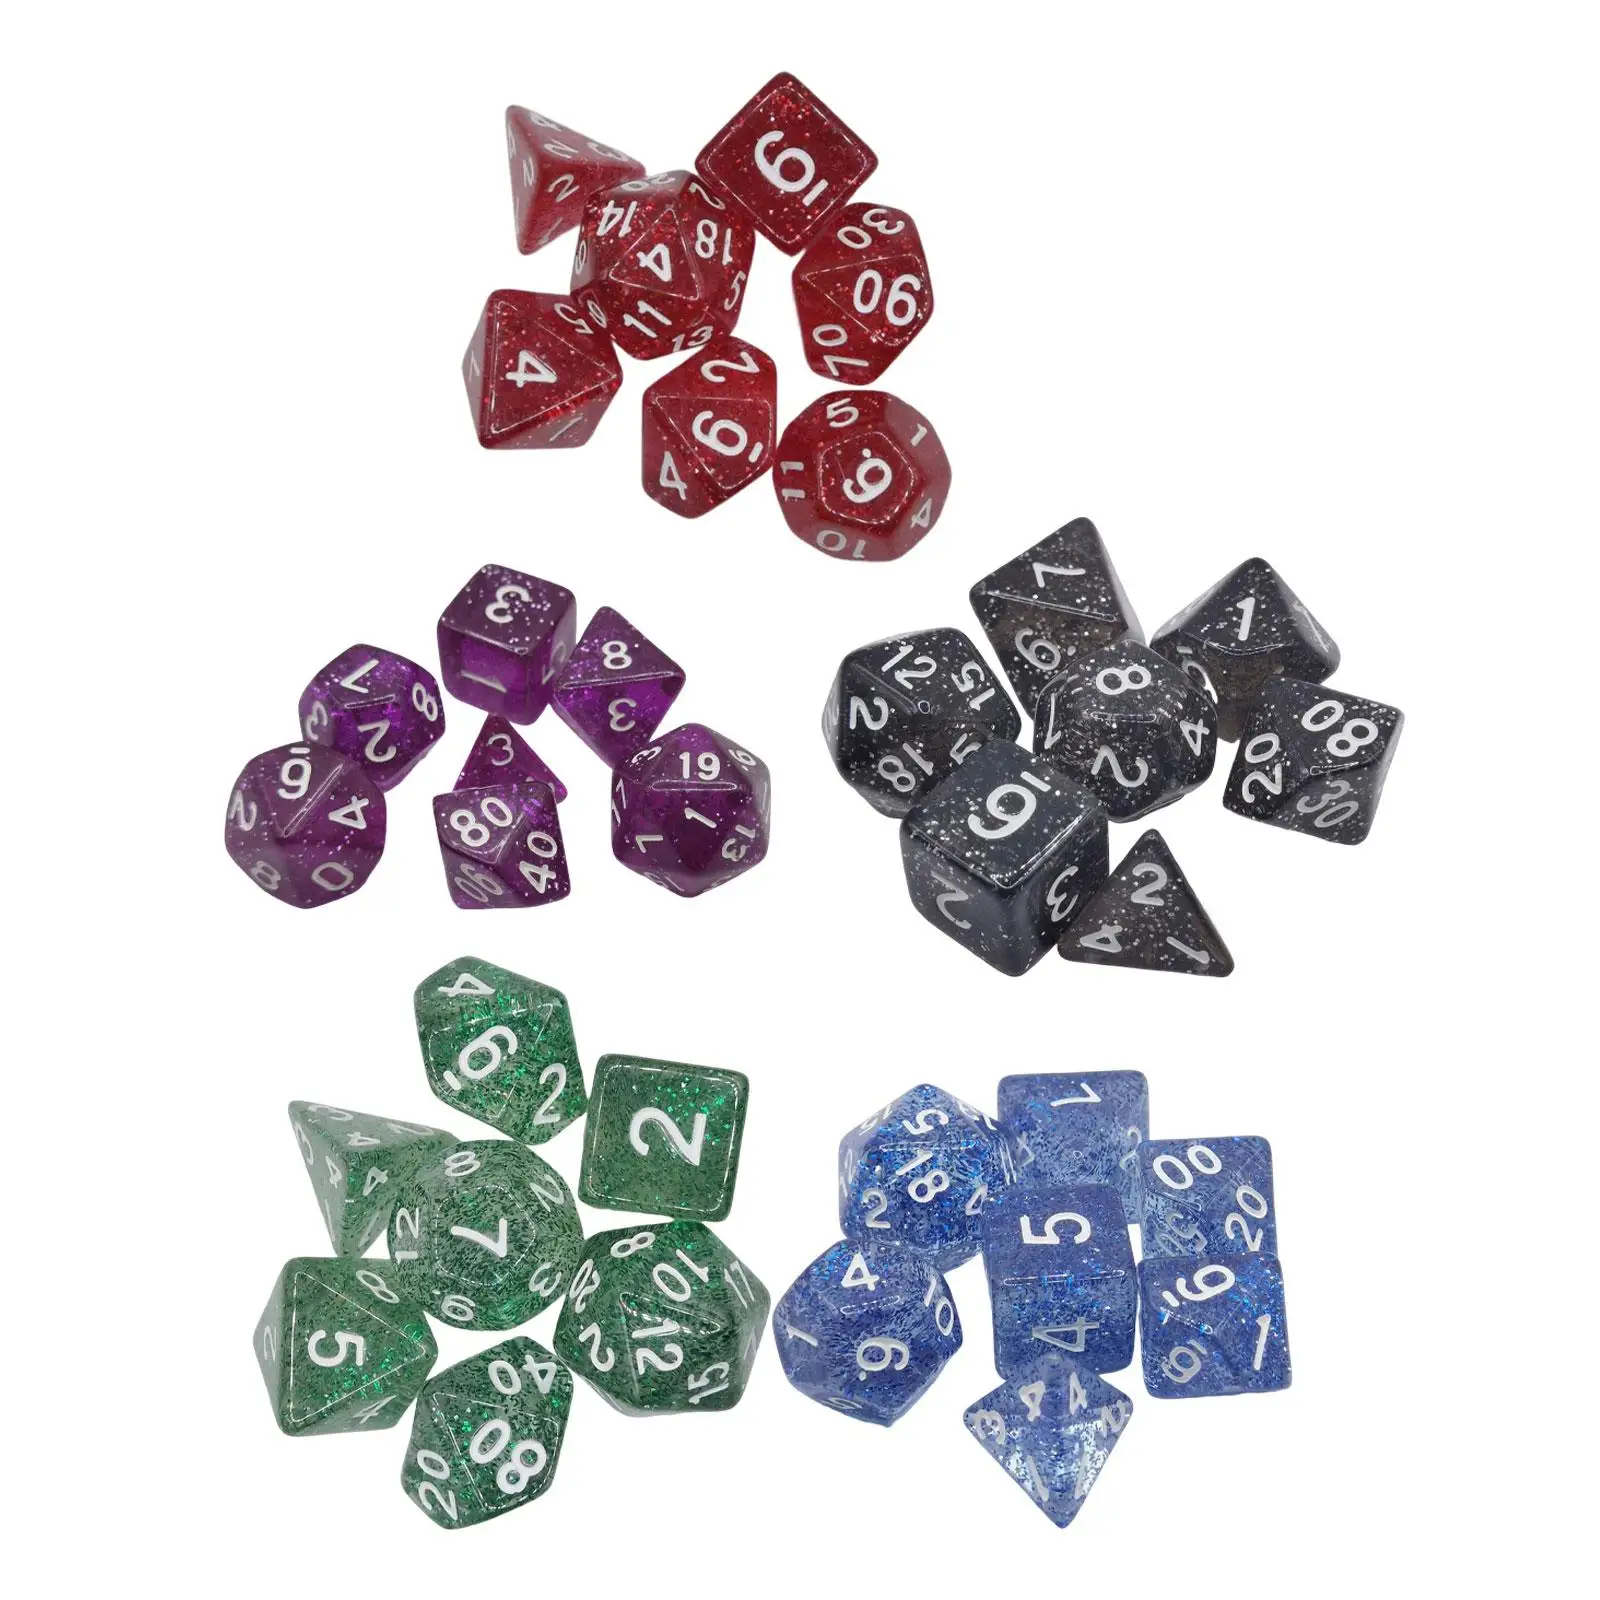 

7 Pieces Polyhedral Dices Set Lightwheigt Glitter Multi Sided Dice D20,D12,D10 (00-90 and 0-9),D8,D6 and D4. for Board Game